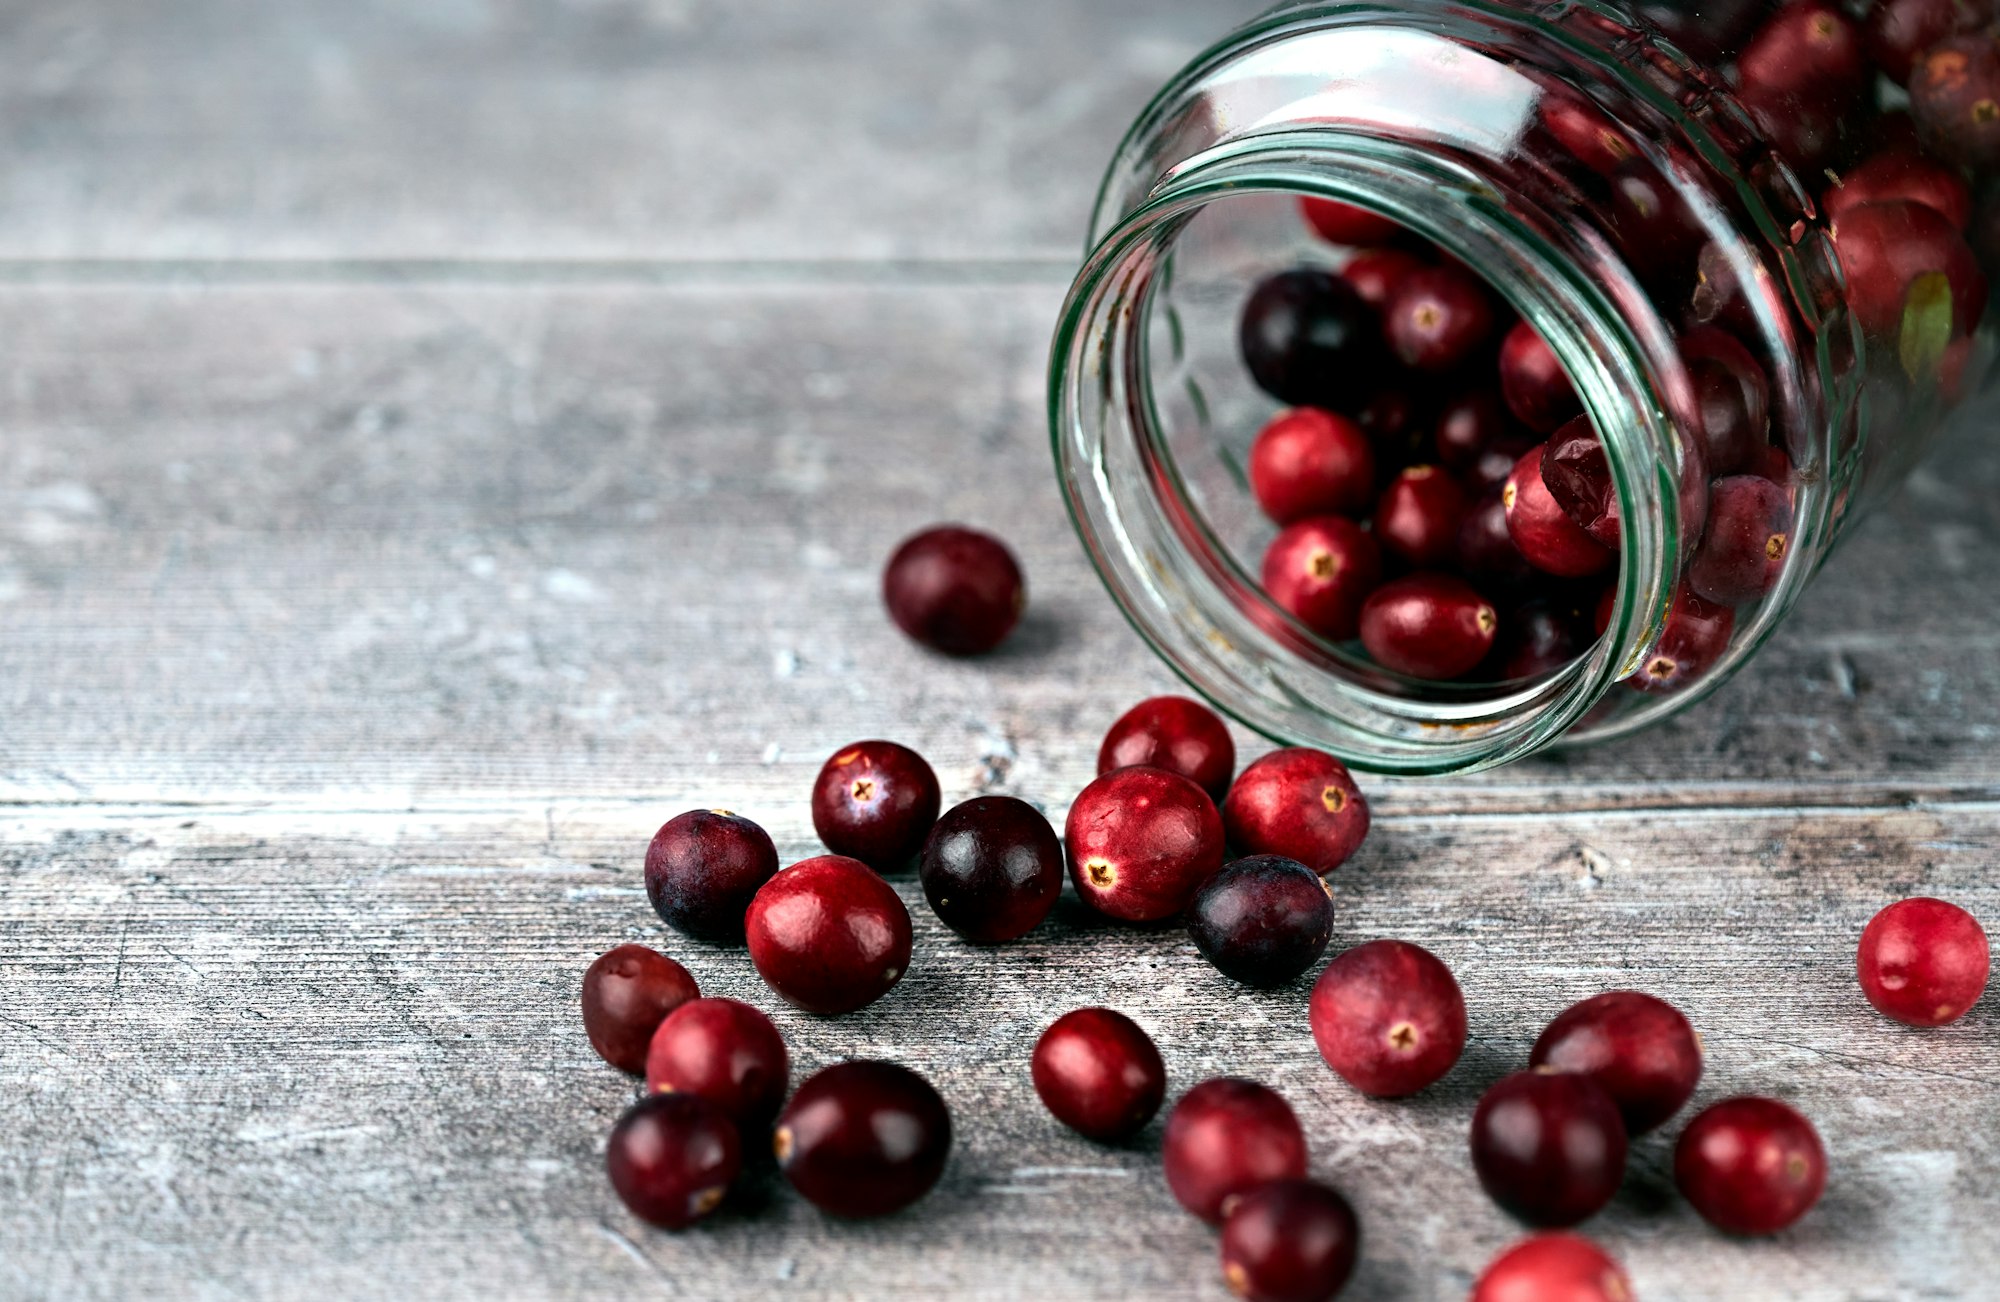 Jar and cranberries. Selective focus on cranberries and jar sides. Close up